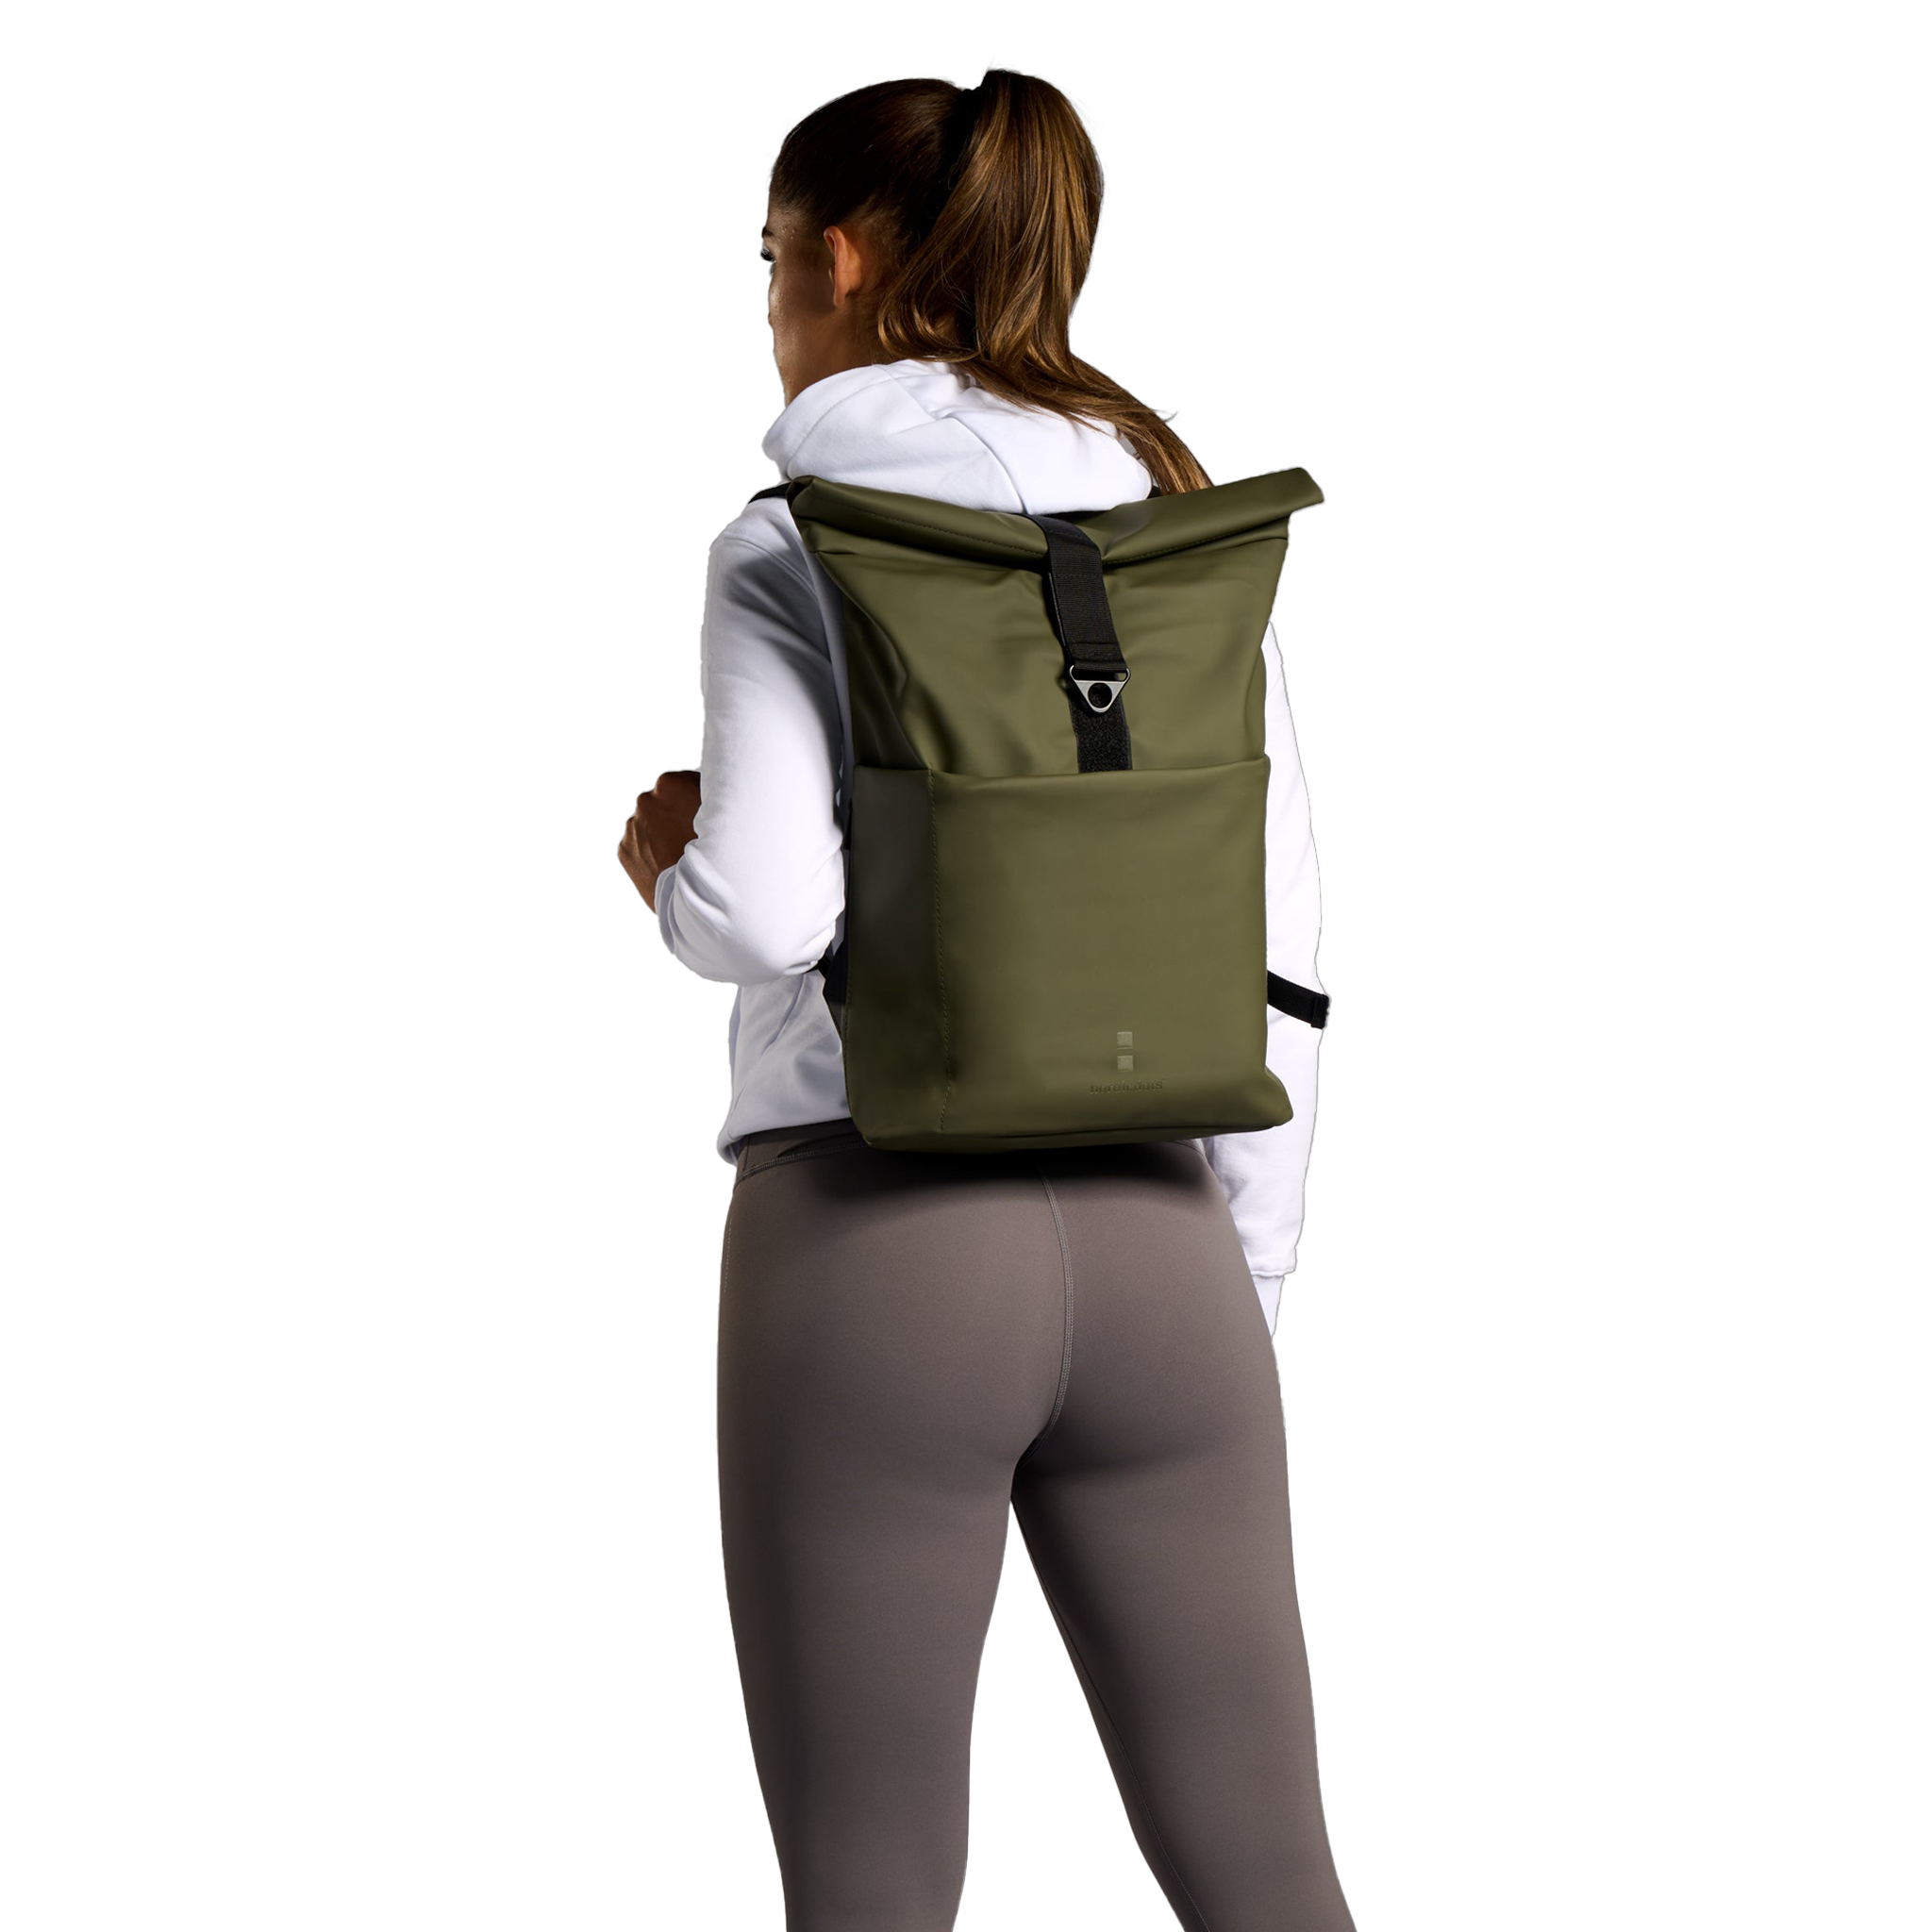 nordicdots Backpack 2Go Unisex Olive Green